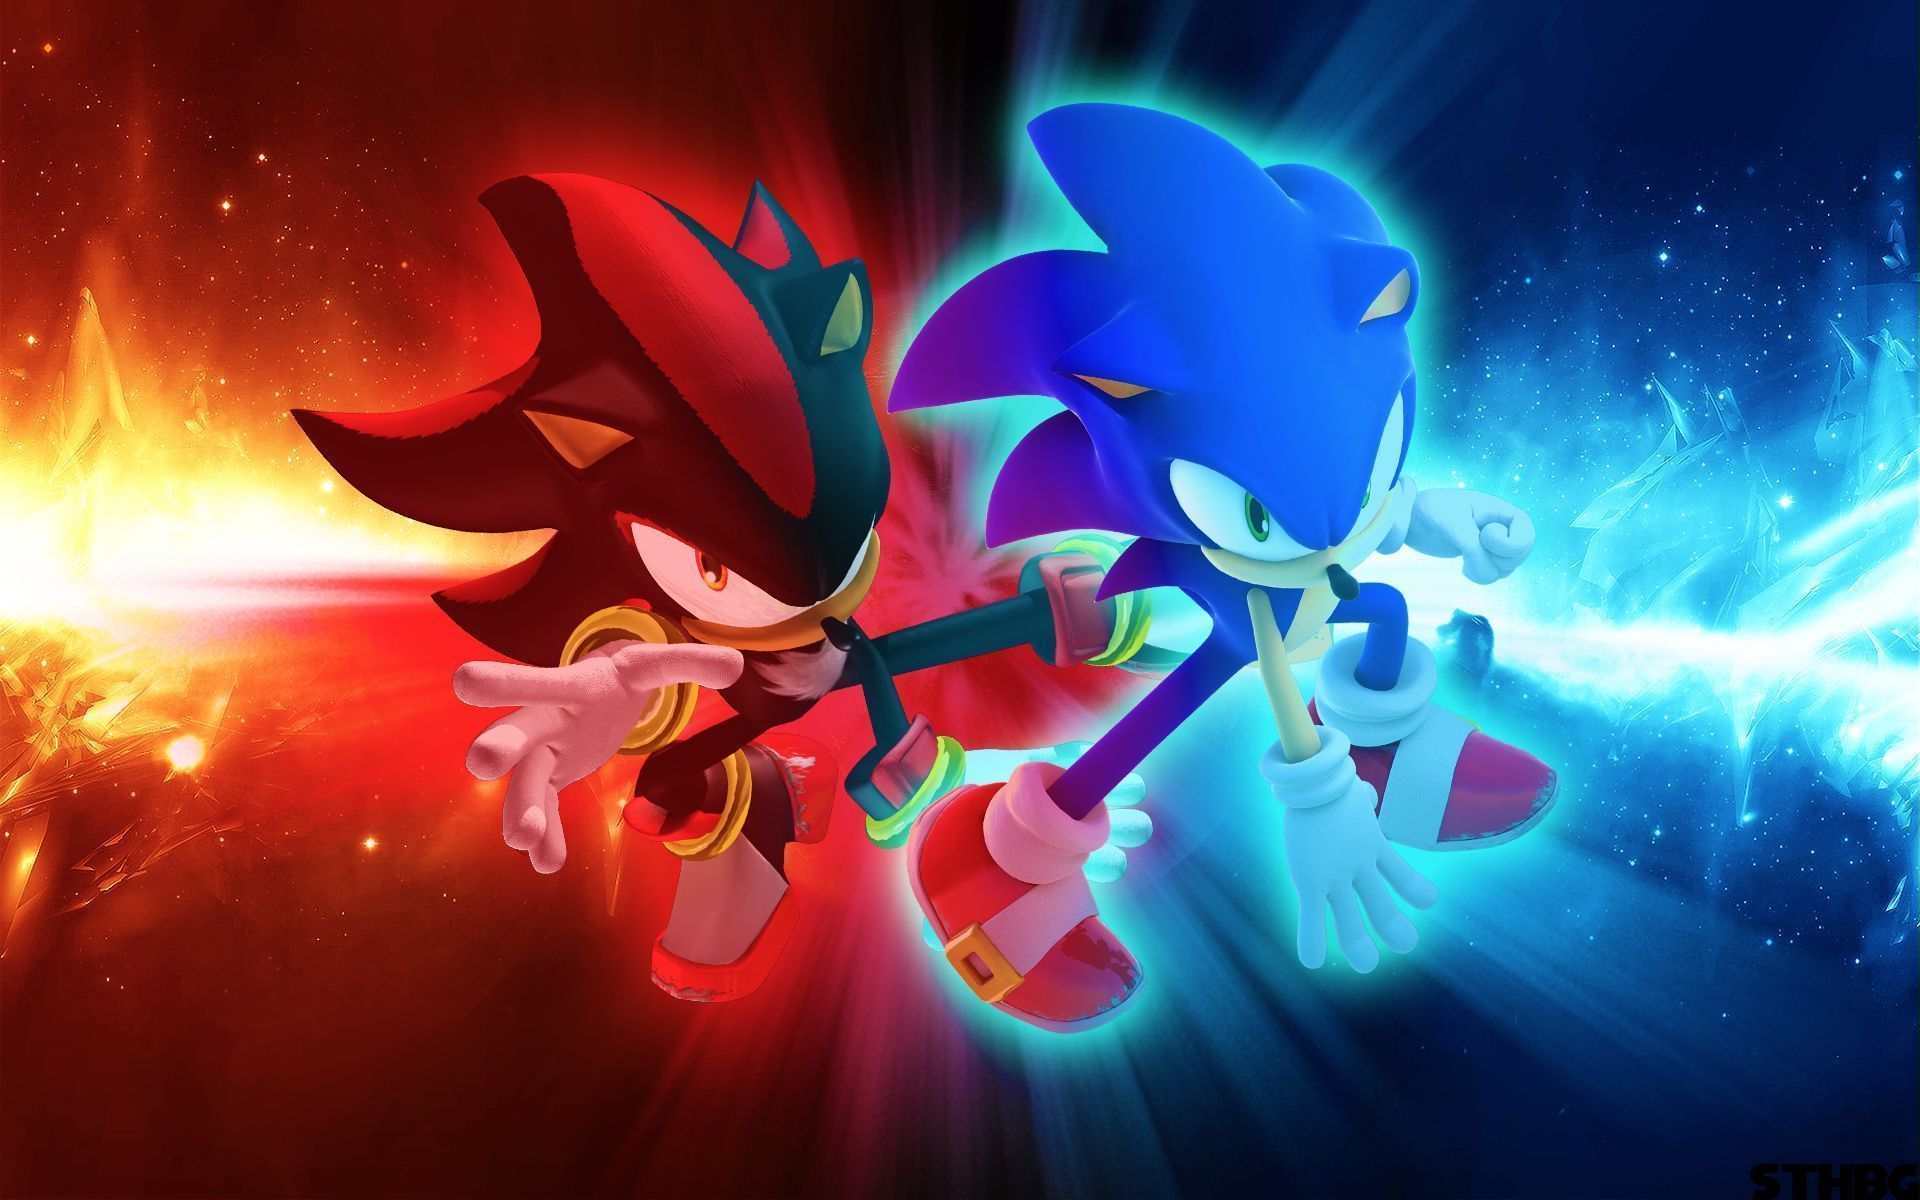 Sonic and Shadow Wallpaper by MP SONIC on DeviantArt